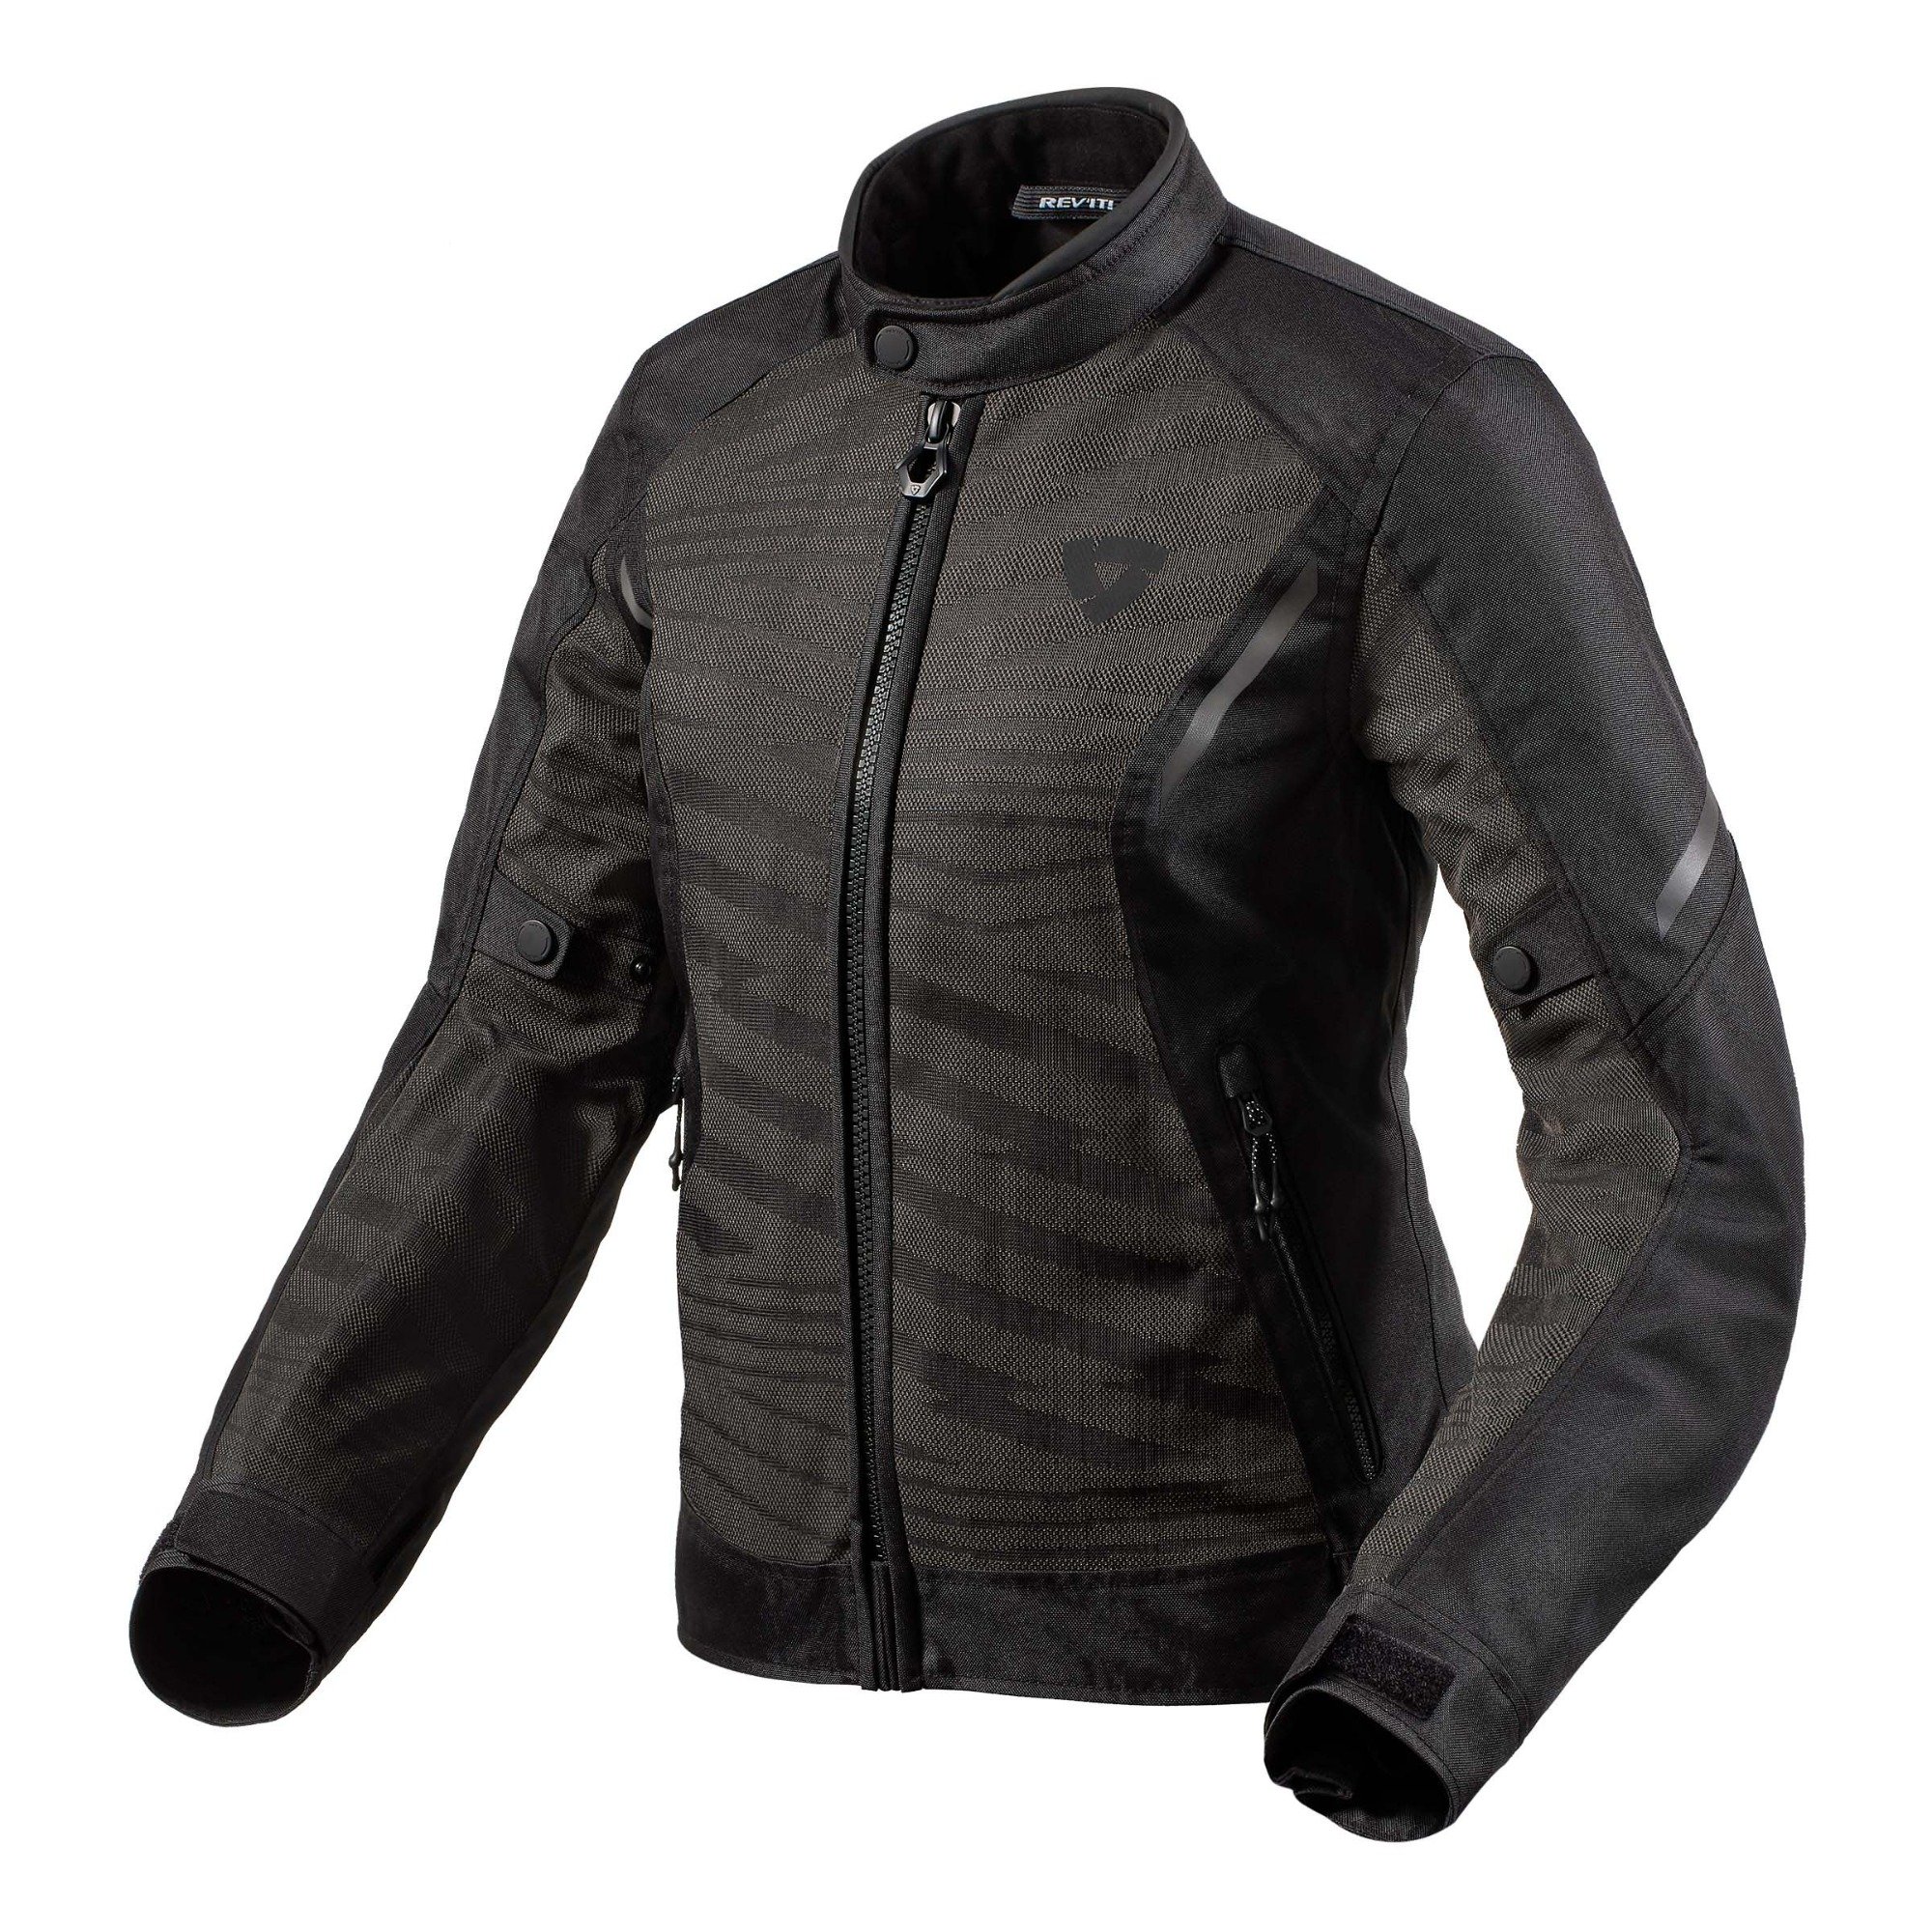 Image of REV'IT! Torque 2 H2O Jacket Lady Black Anthracite Size 44 ID 8700001345545